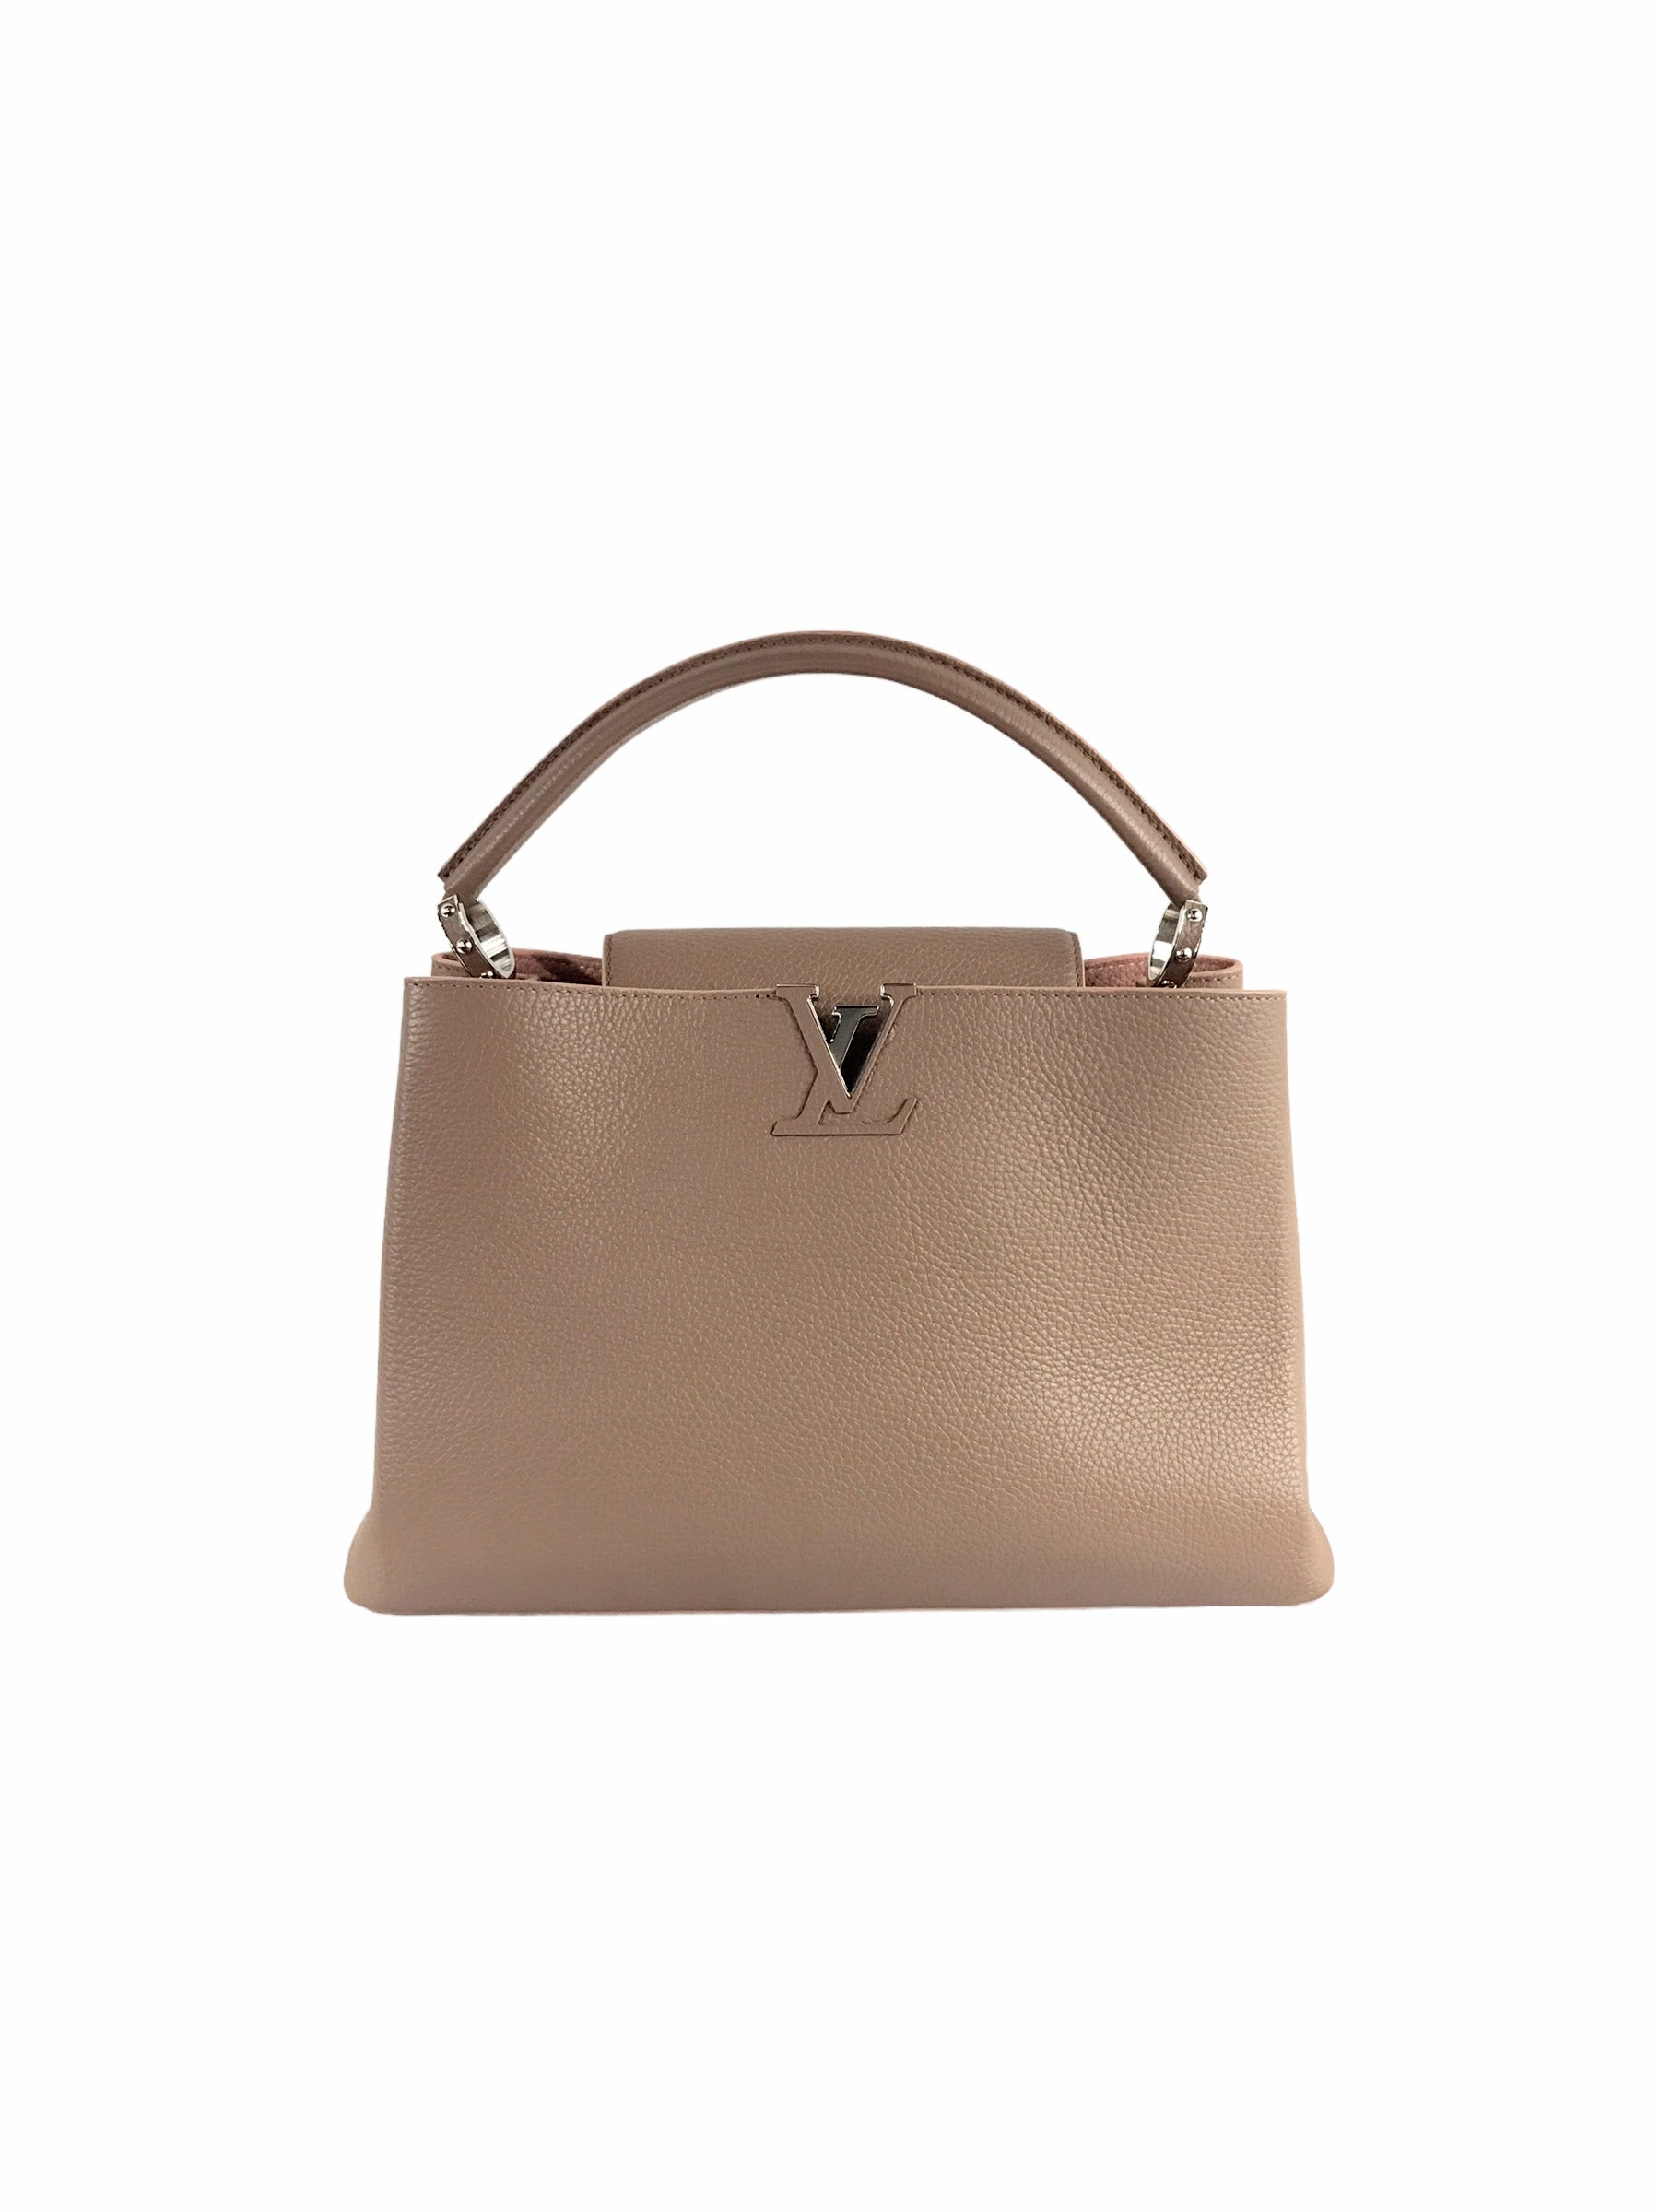 LOUIS VUITTON Beige Capucines Bag Taurillon Leather and python PM 510002